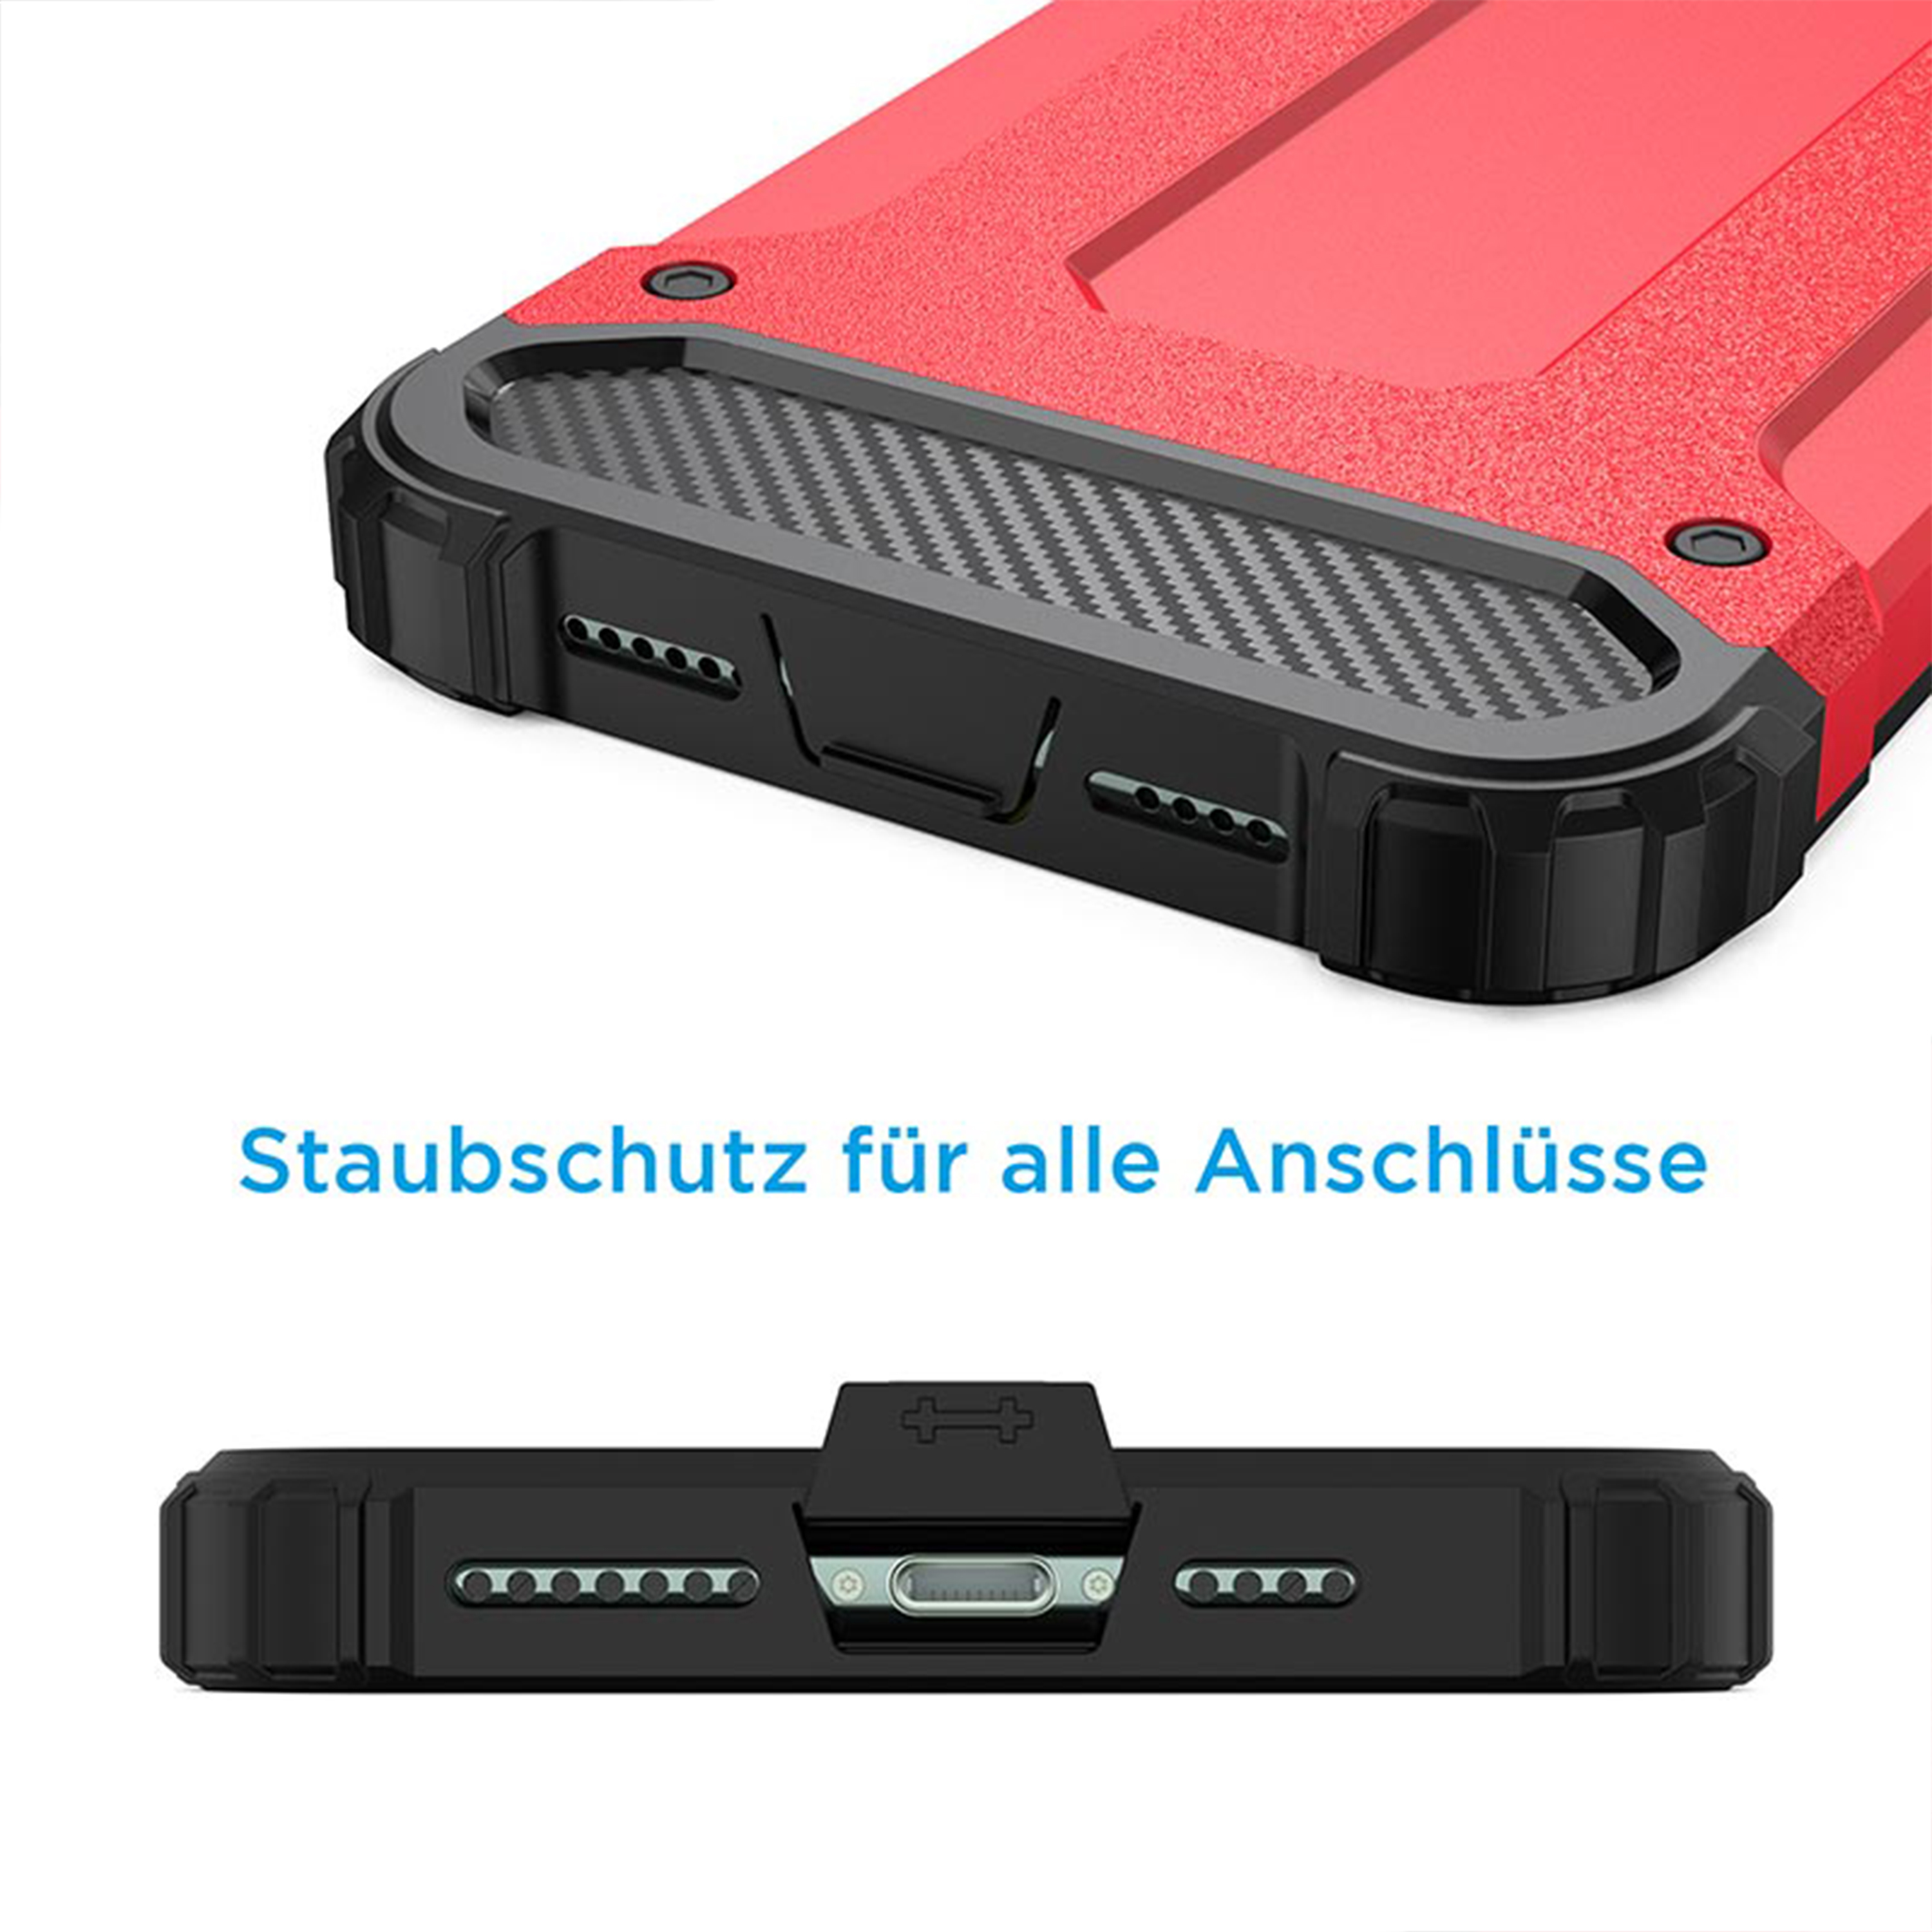 11 PRO iPhone, IPhone MAX, HBASICS MAX, Handyhülle Backcover, für PRO Rot Armor 11